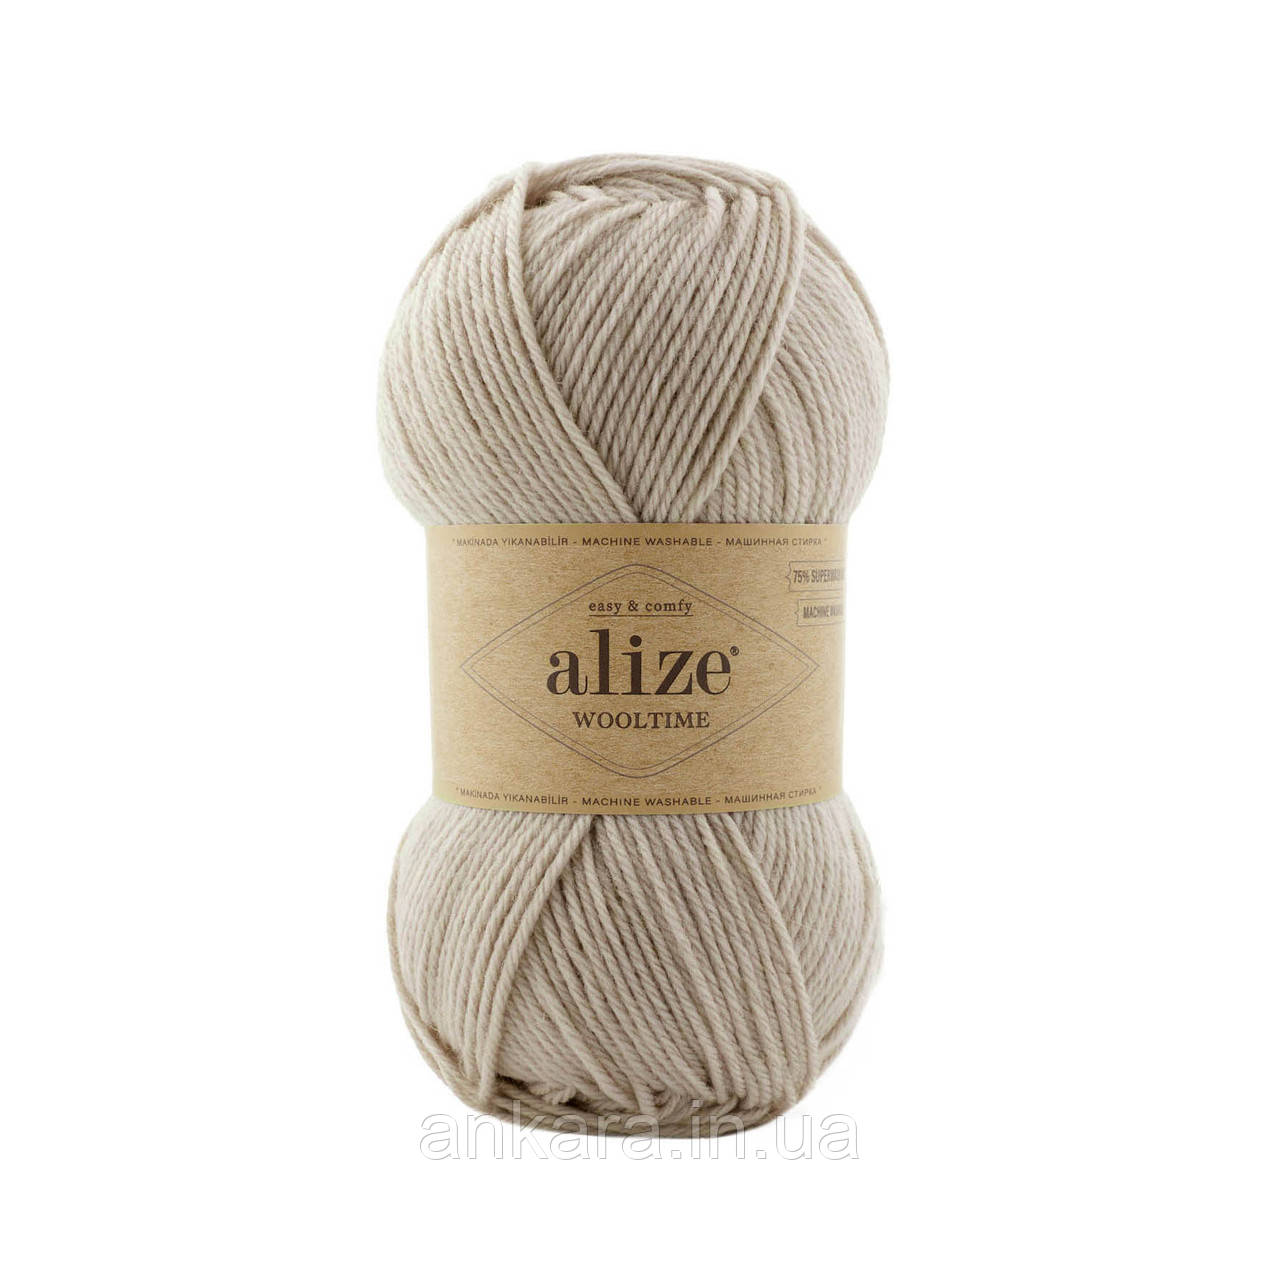 Alize Wooltime 152